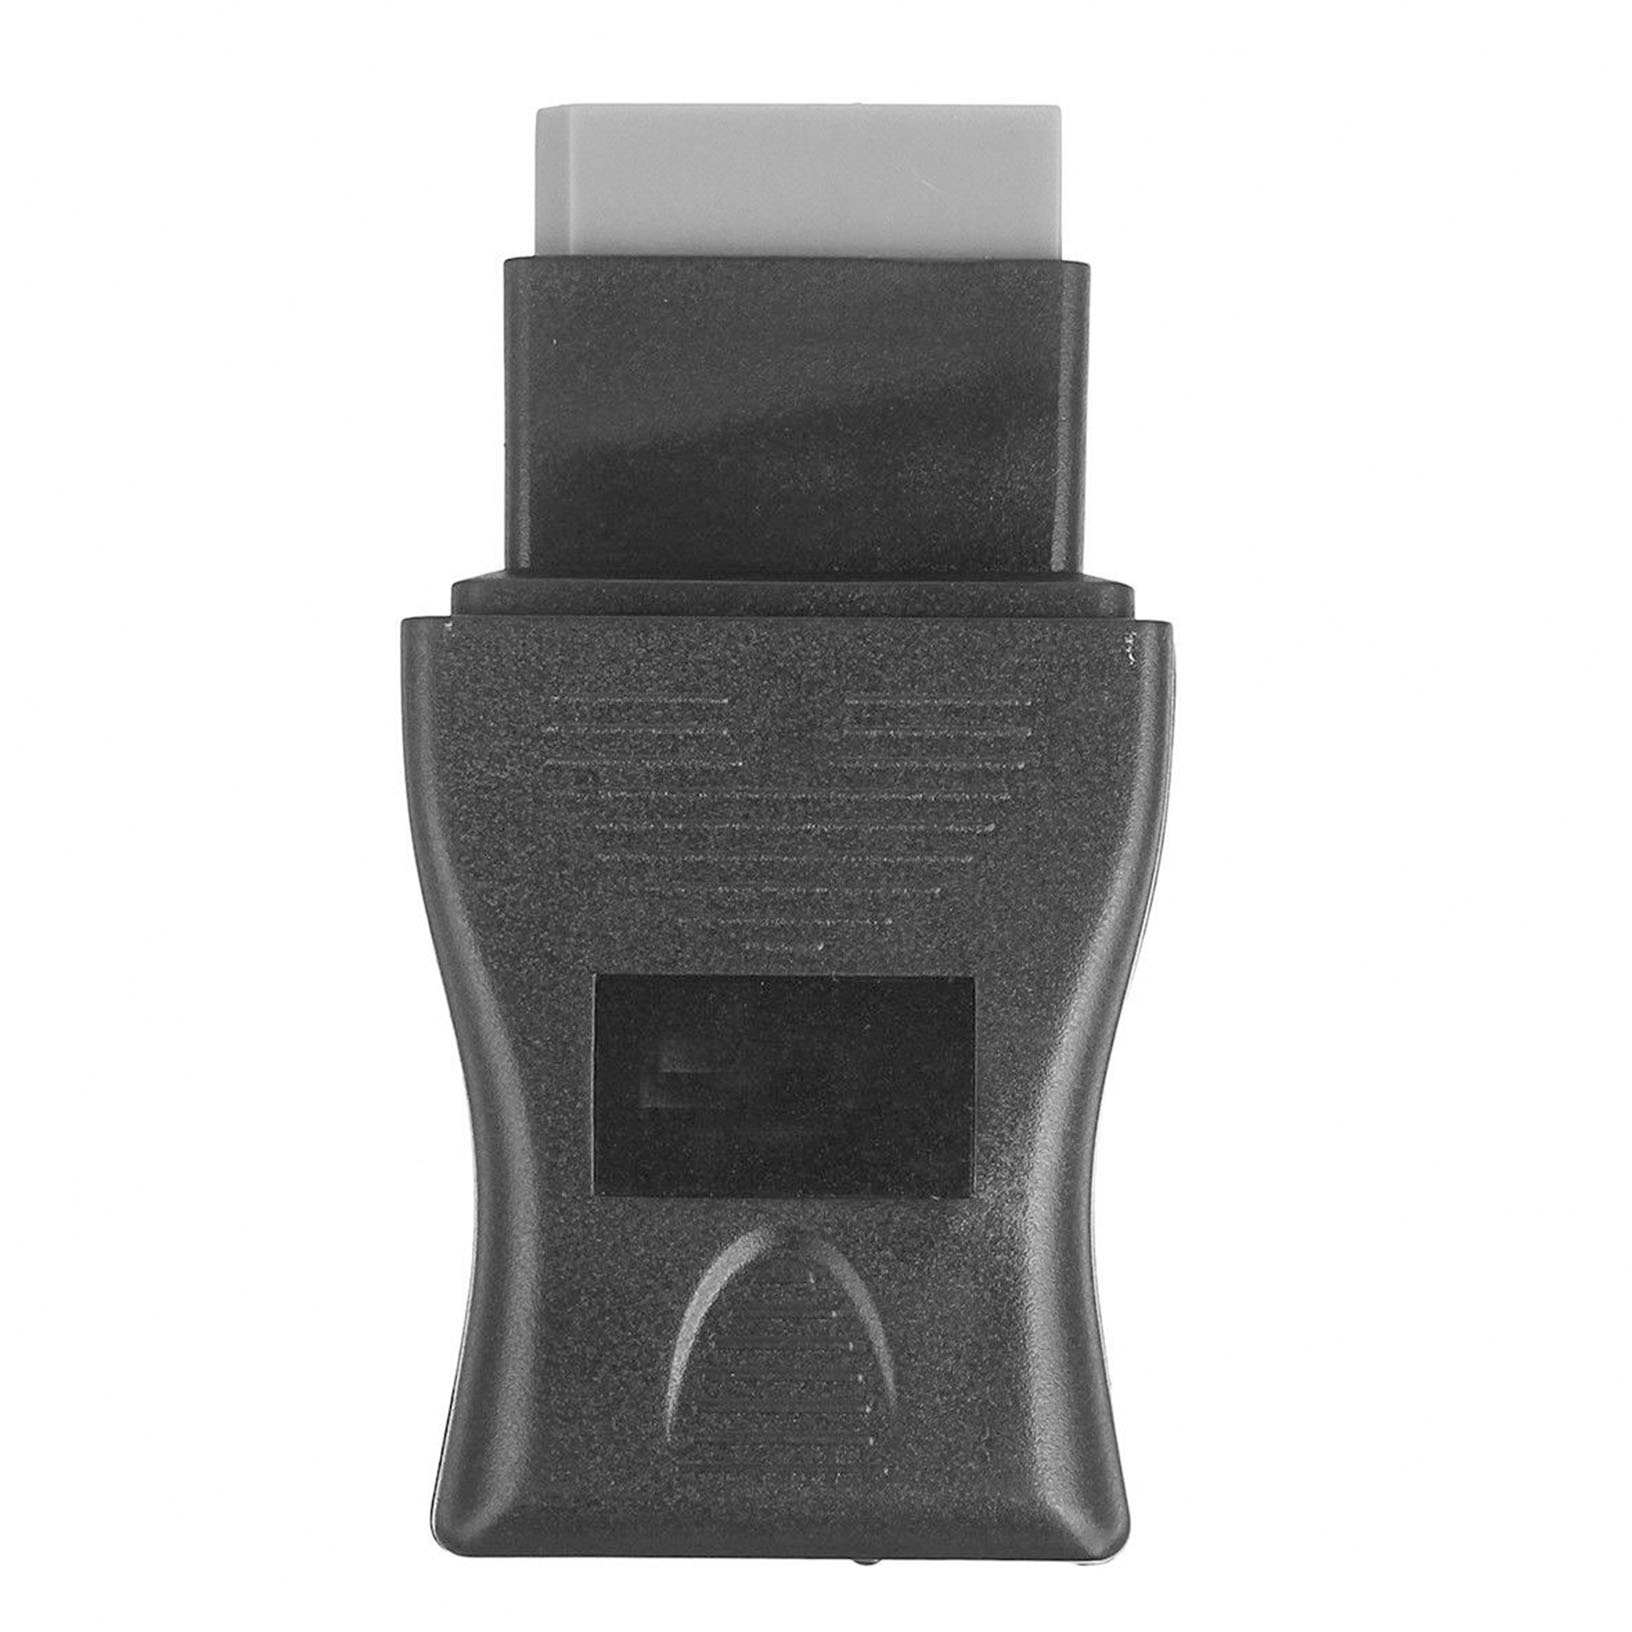 blazt nissan consult usb cable software